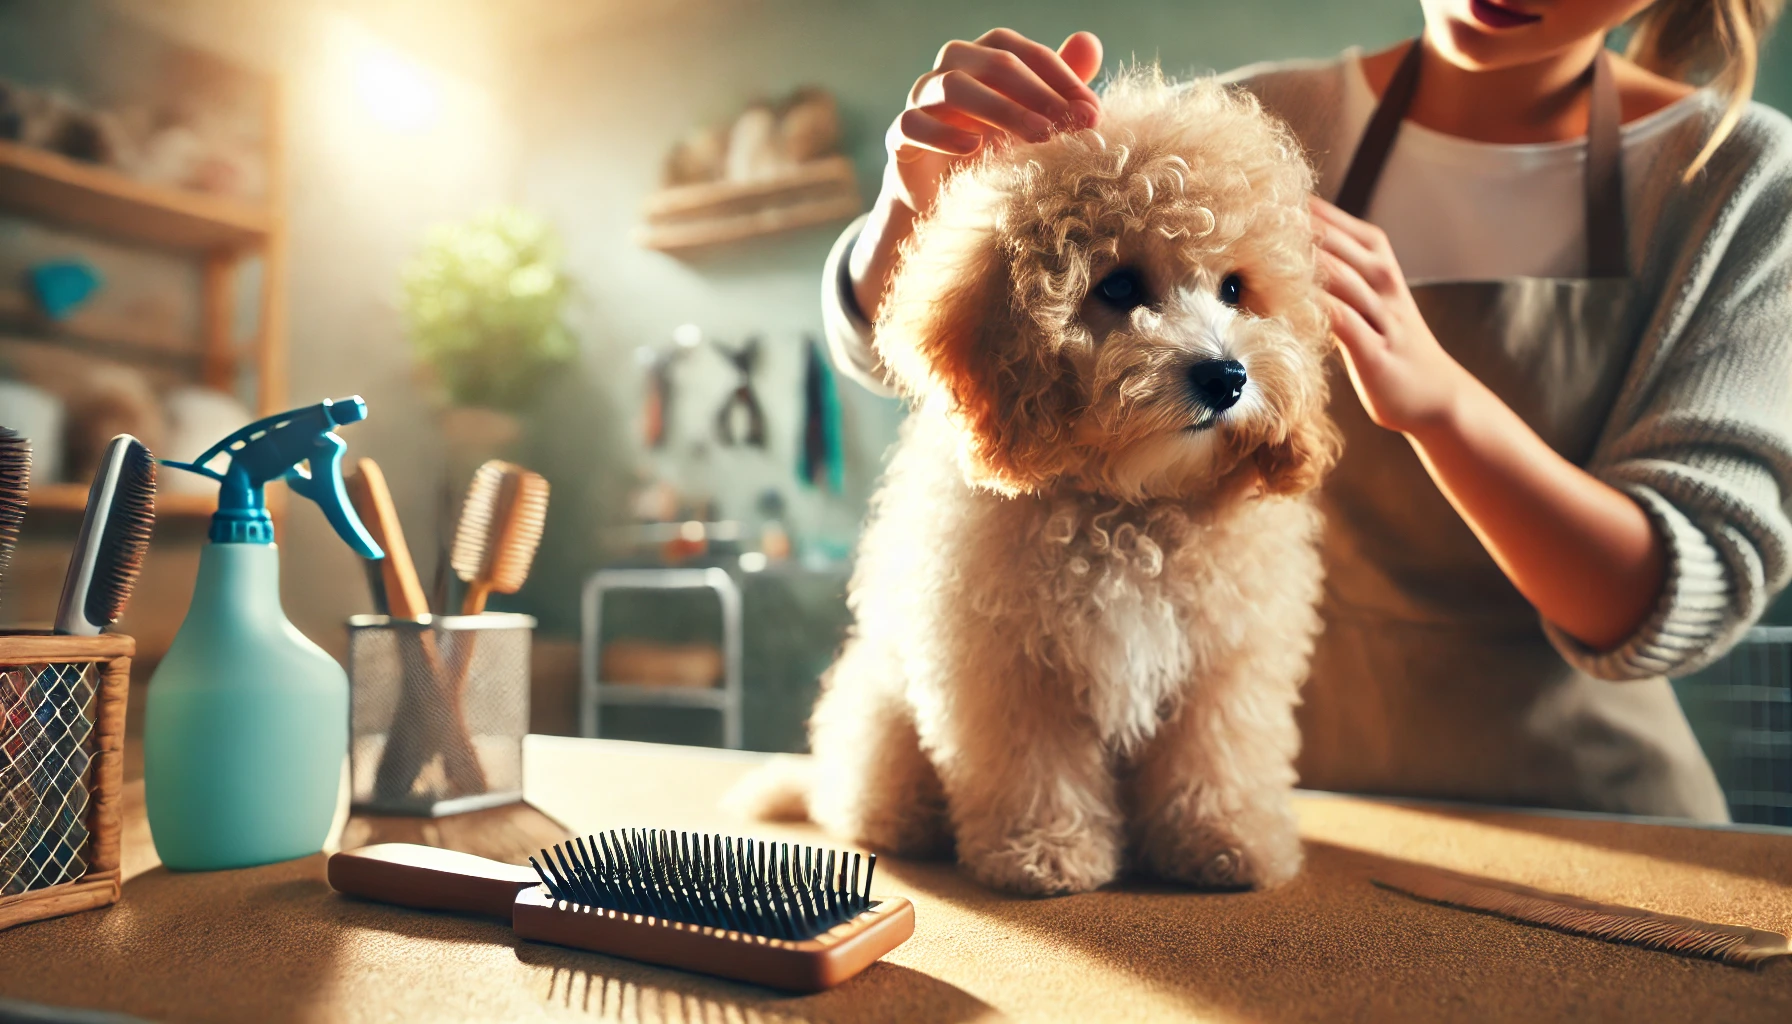 image of a small and curly Maltipoo being brushed. The scene shows the Maltipoo sitting calmly while a person gently brushes its coat